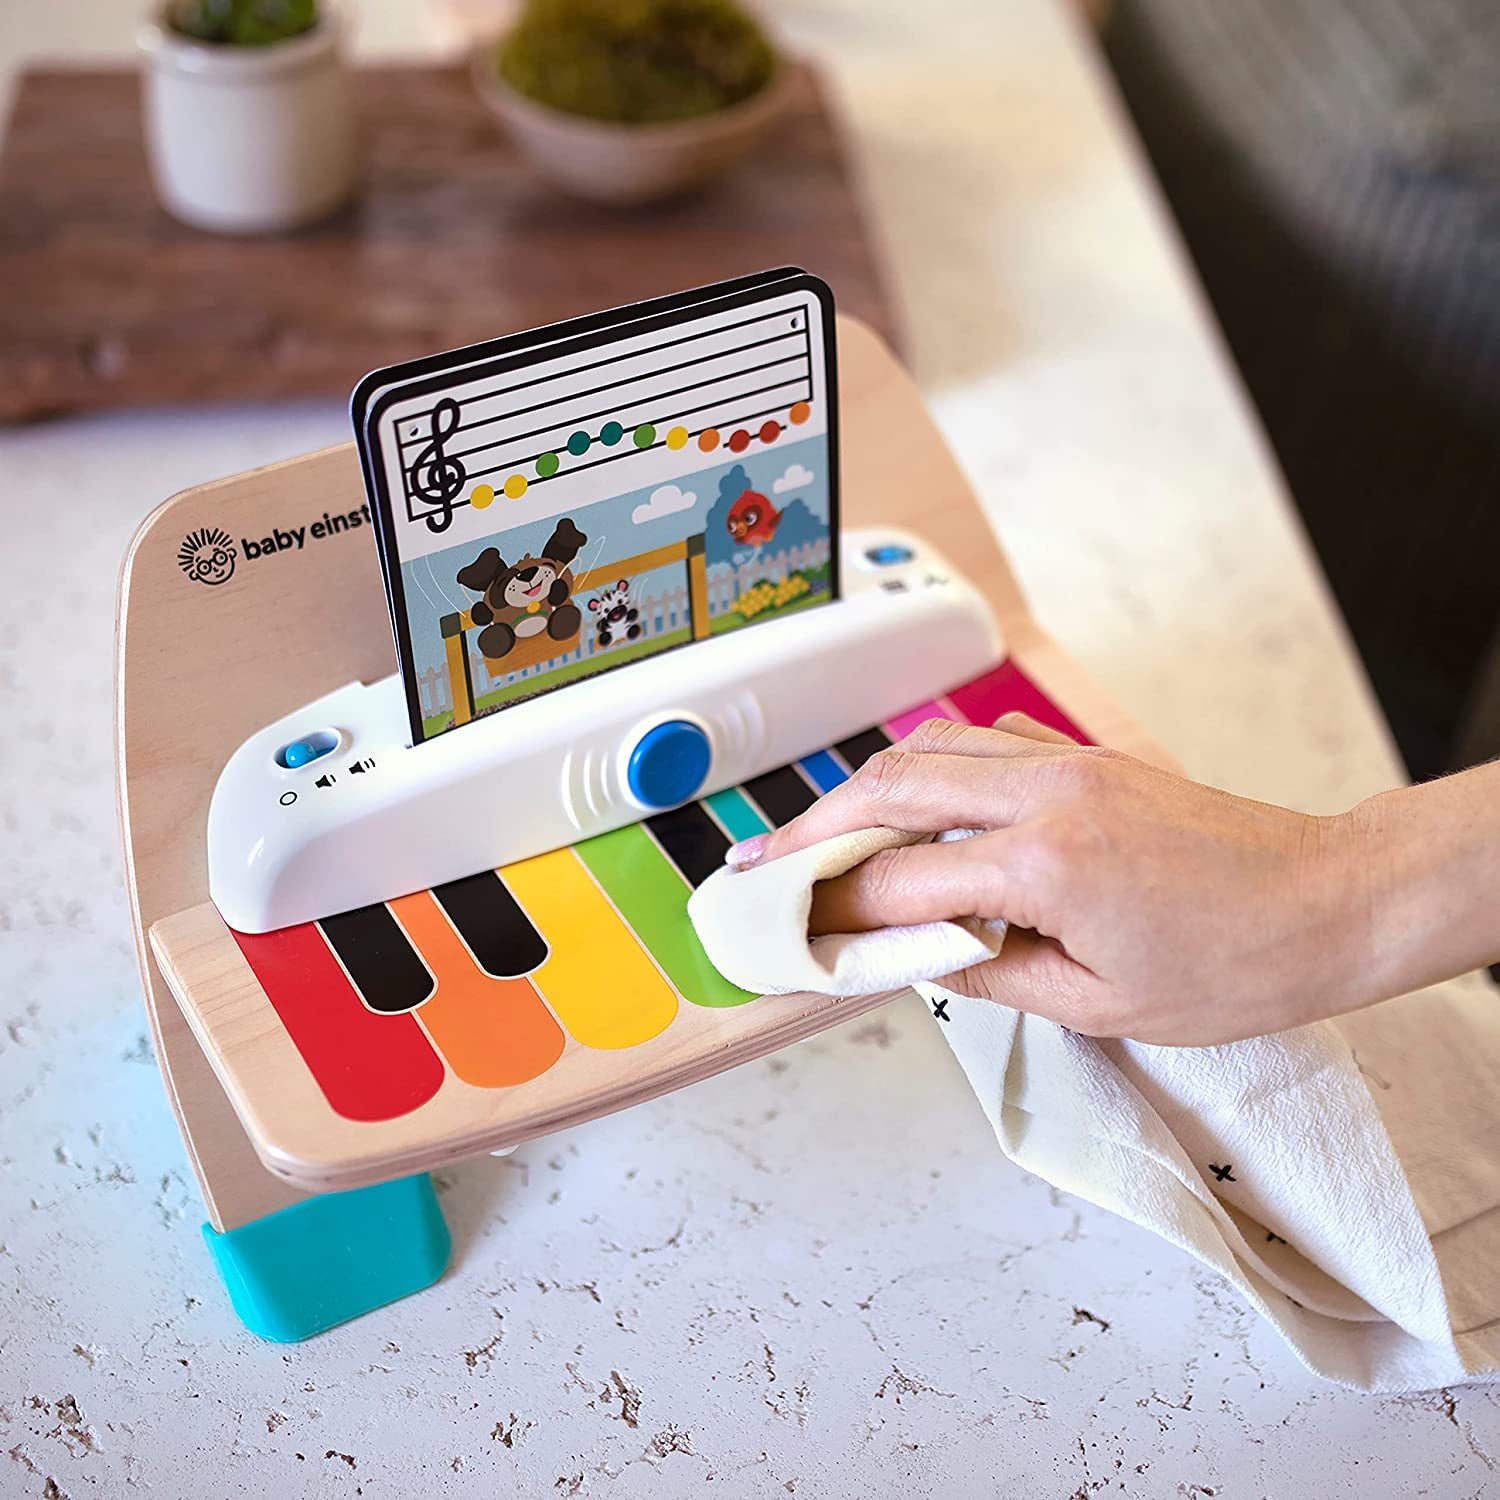 "Enchanting Hape Magic Touch Piano: a Musical Delight for Toddlers, 6 Months and Beyond!"